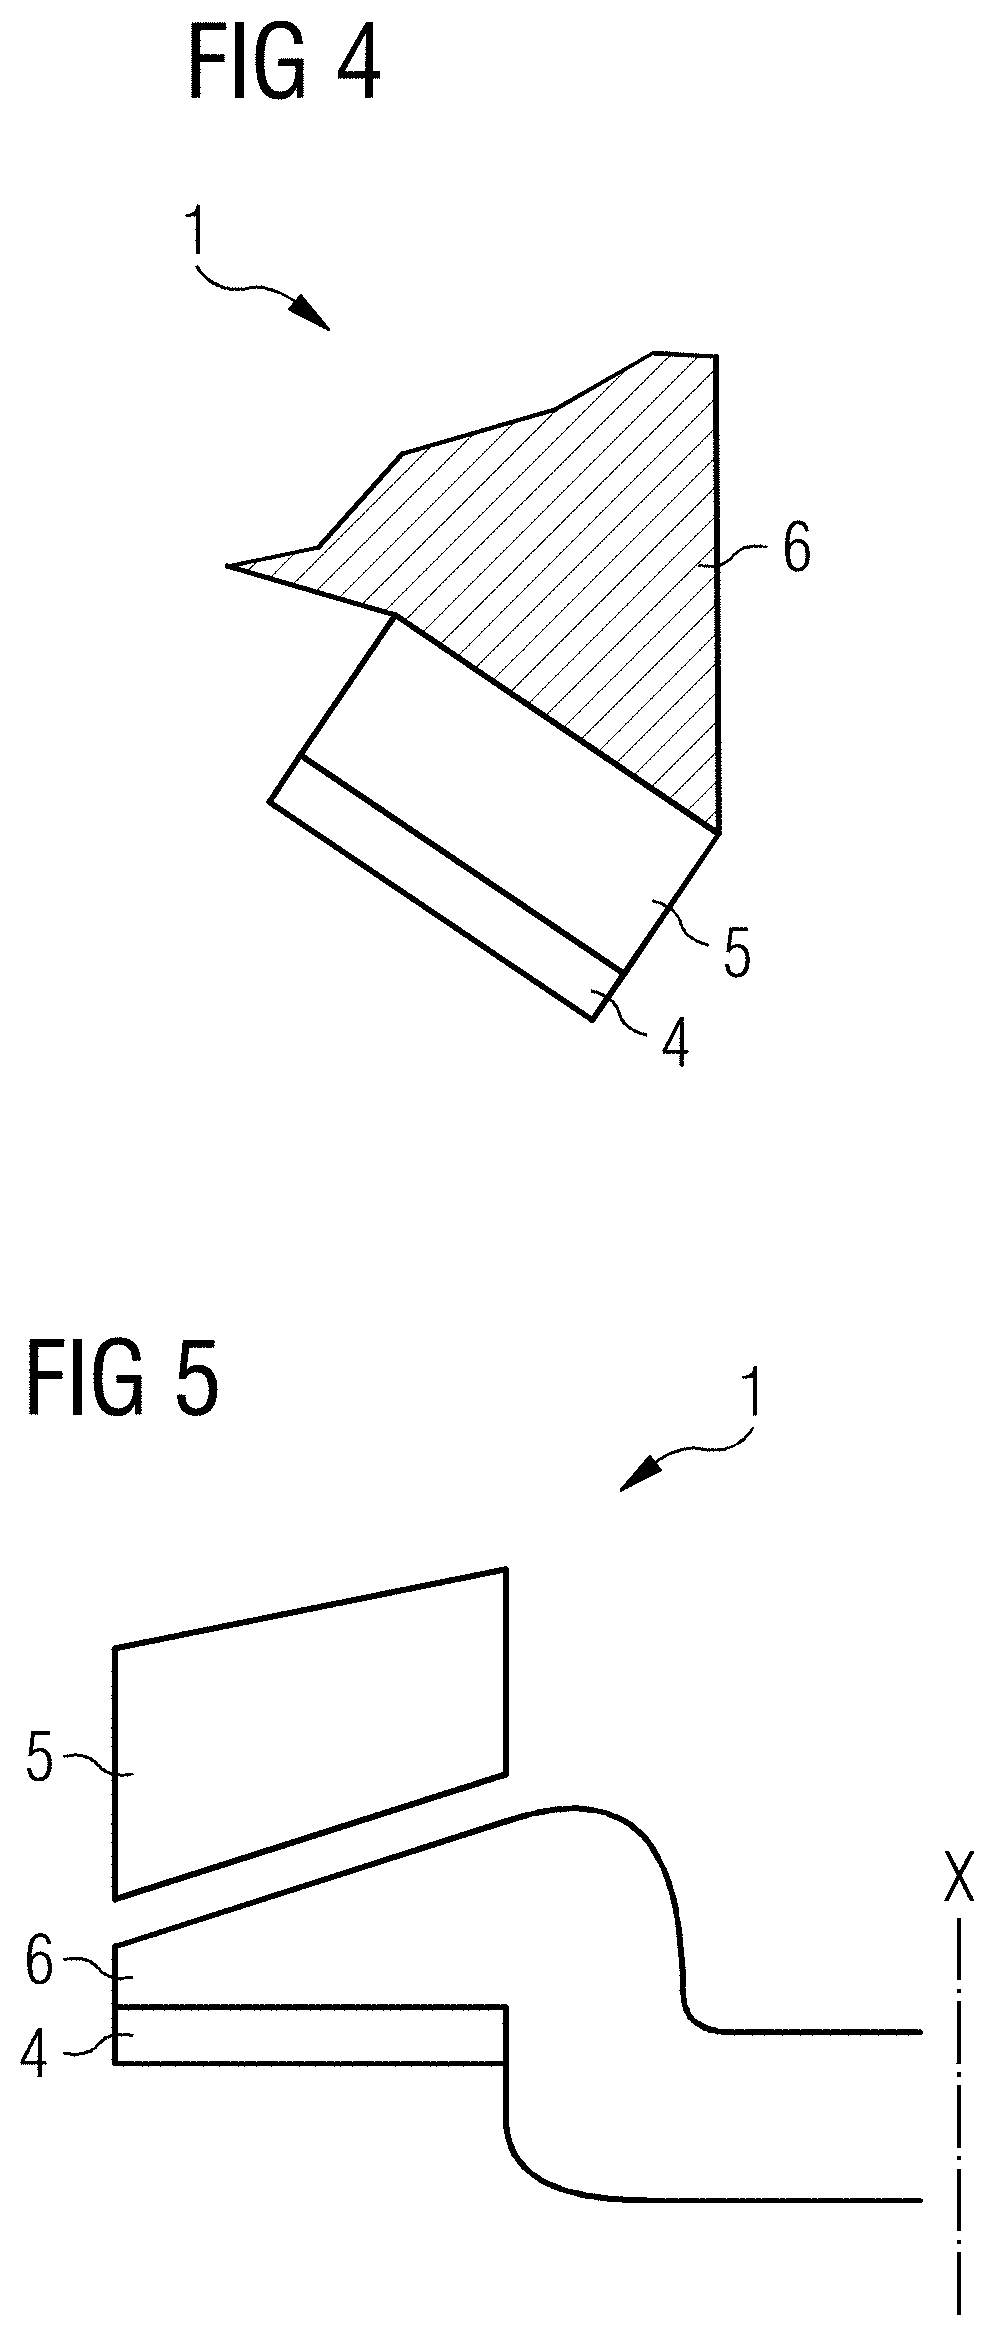 X-ray device and method of applying x-ray radiation